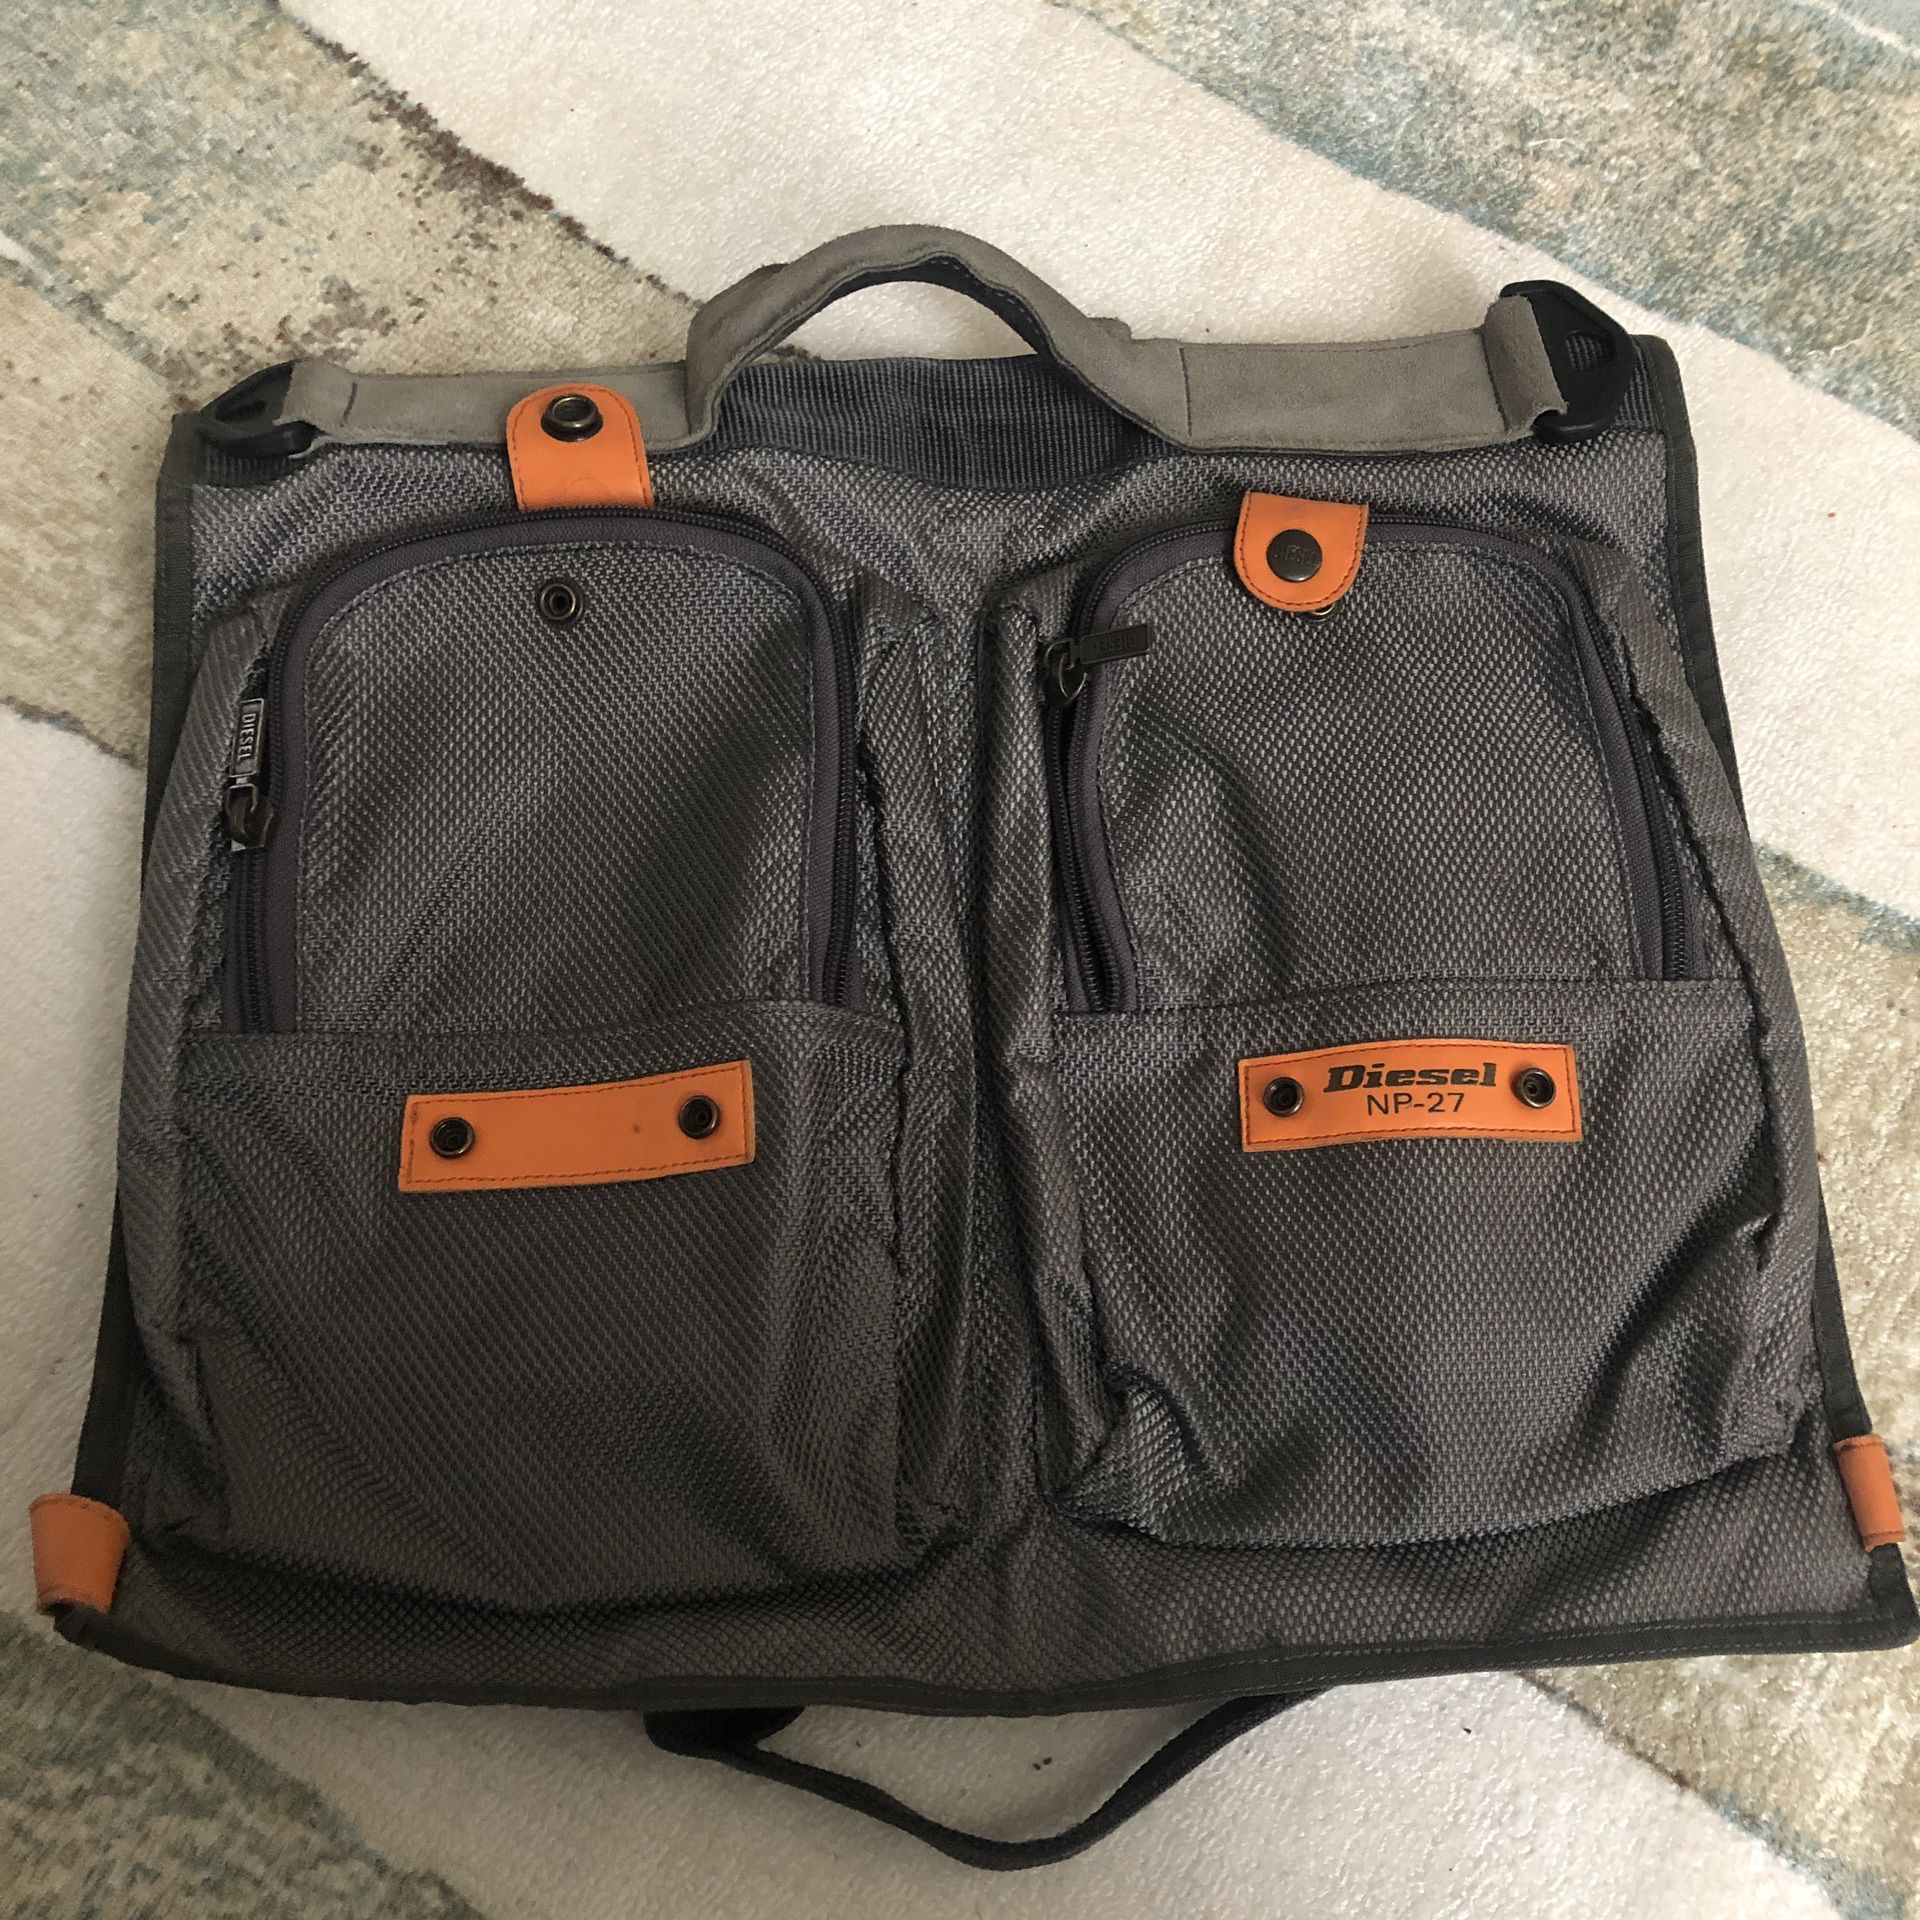 Diesel Nylon Computer Messenger Bag grey orange zipper pockets. Condition is "Pre-owned". Great Preowned condition but missing cross body strap. Stil